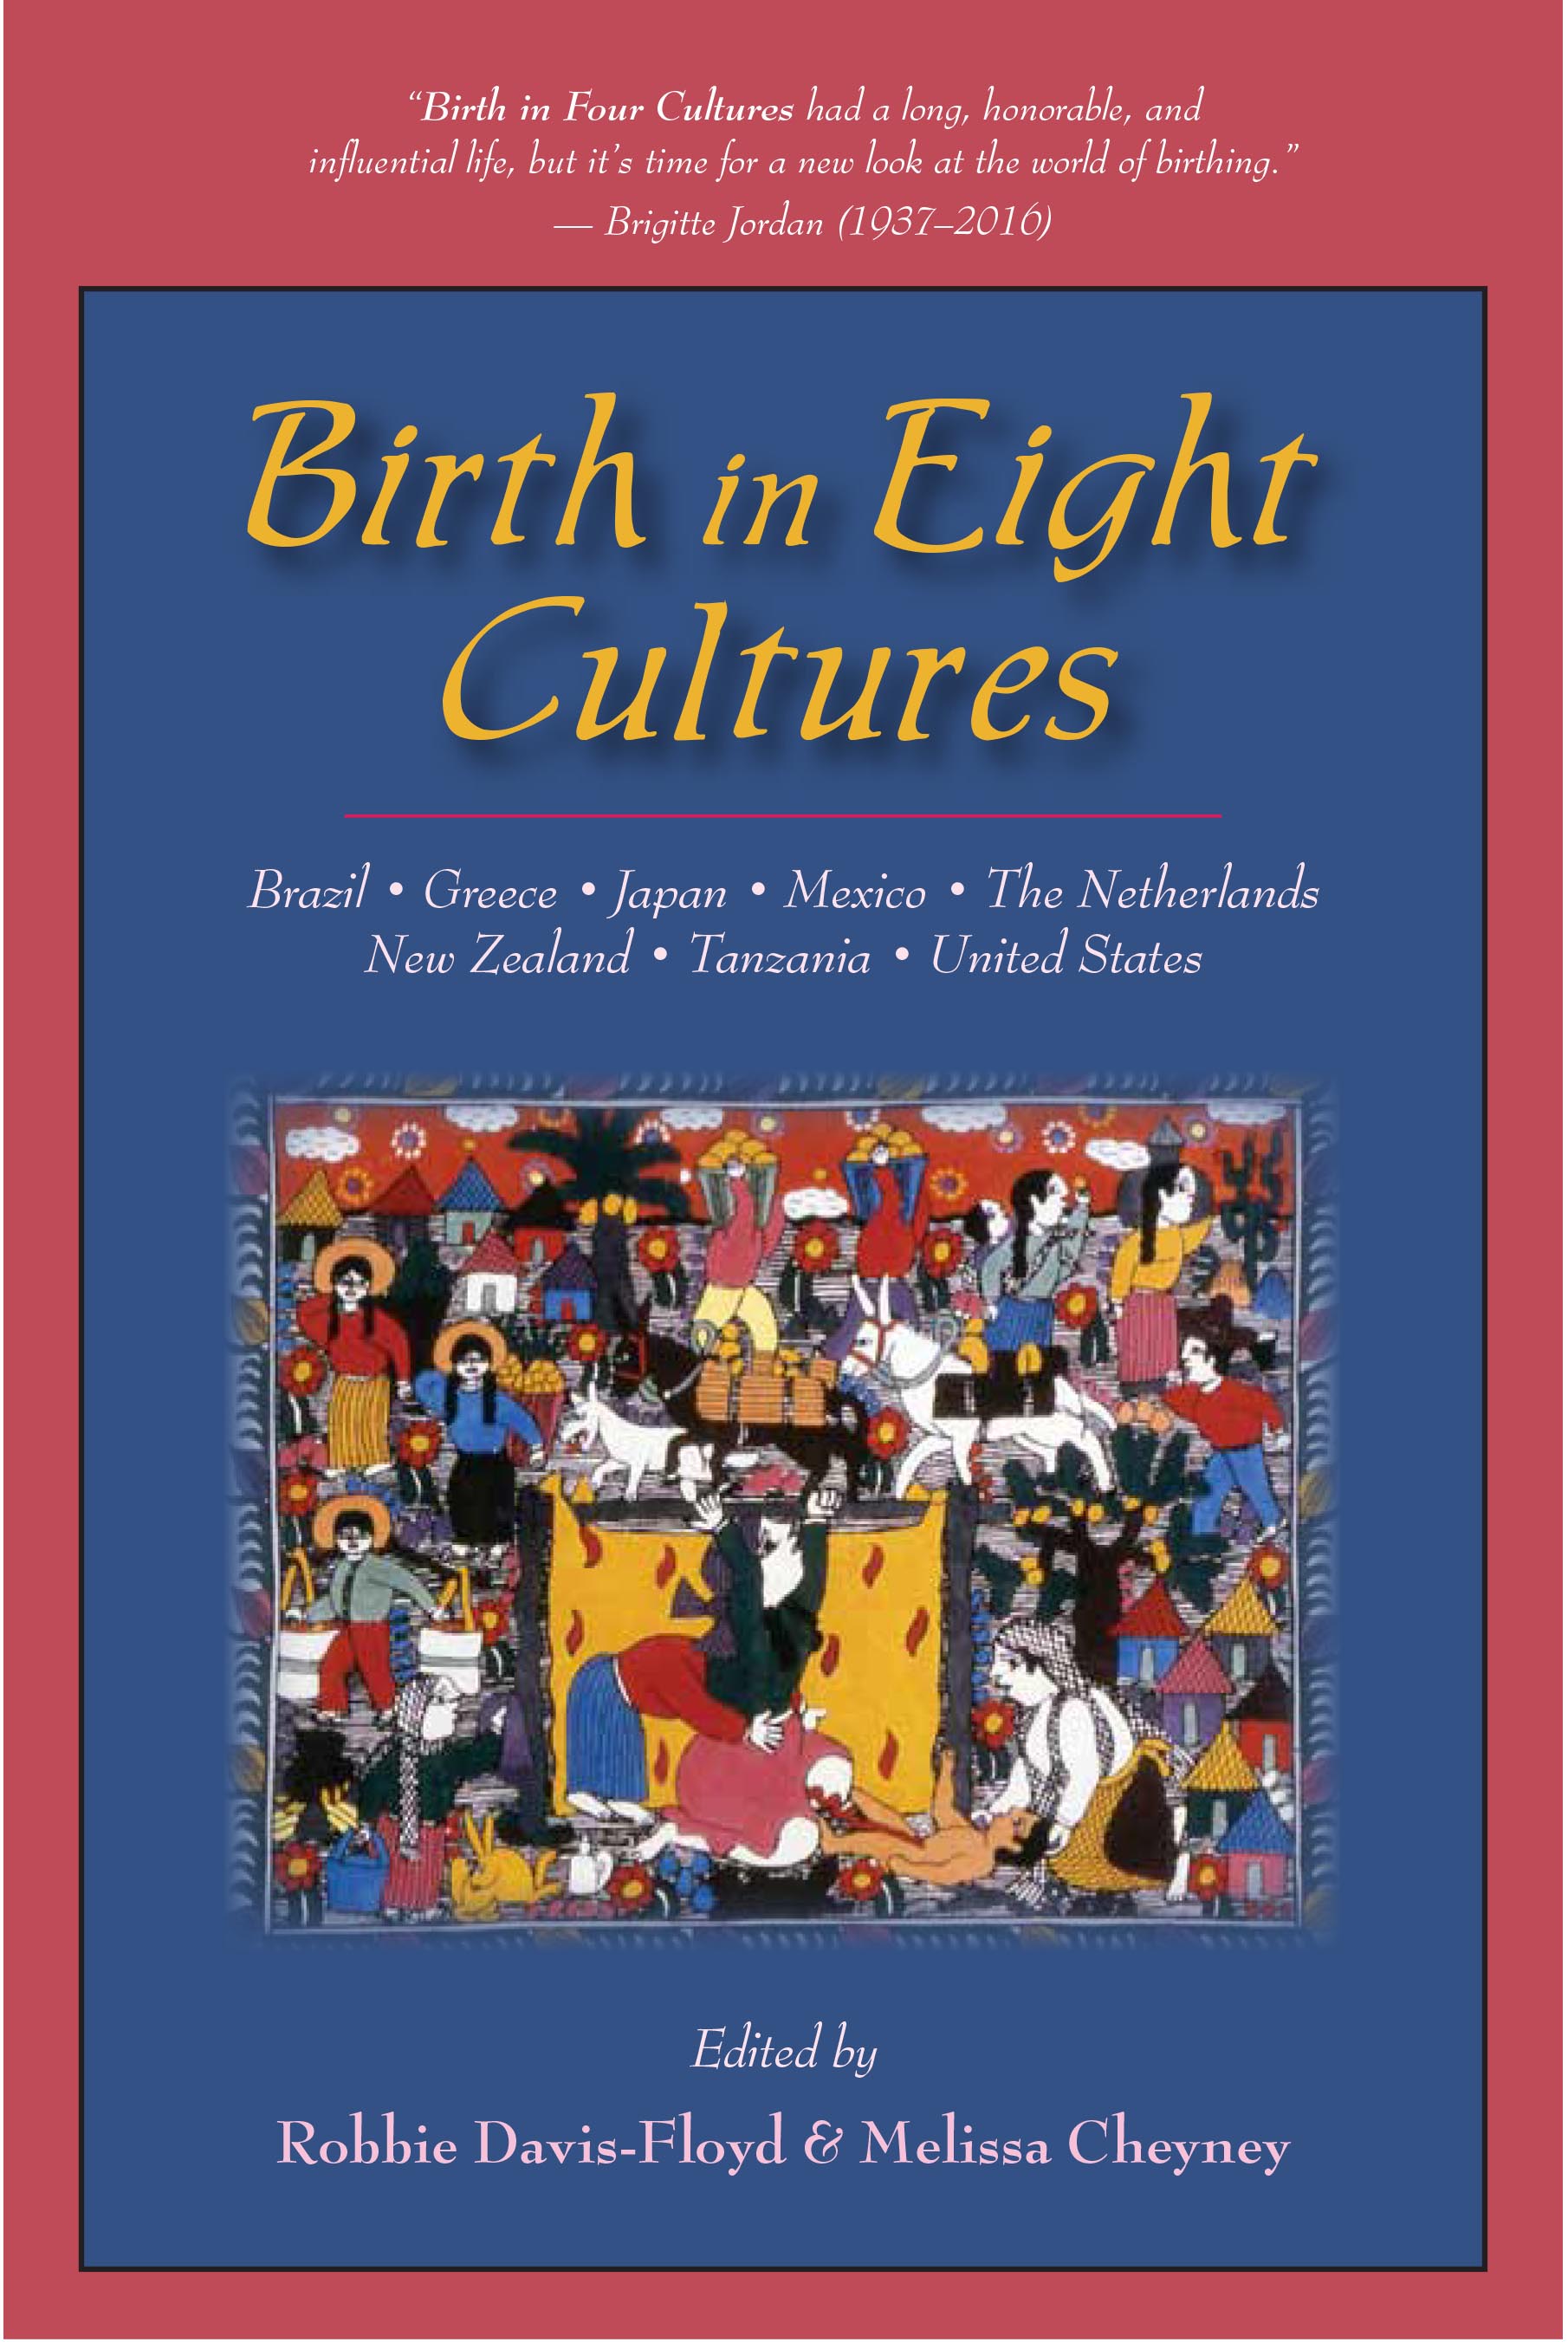 birth in 8 cultures cover.jpg